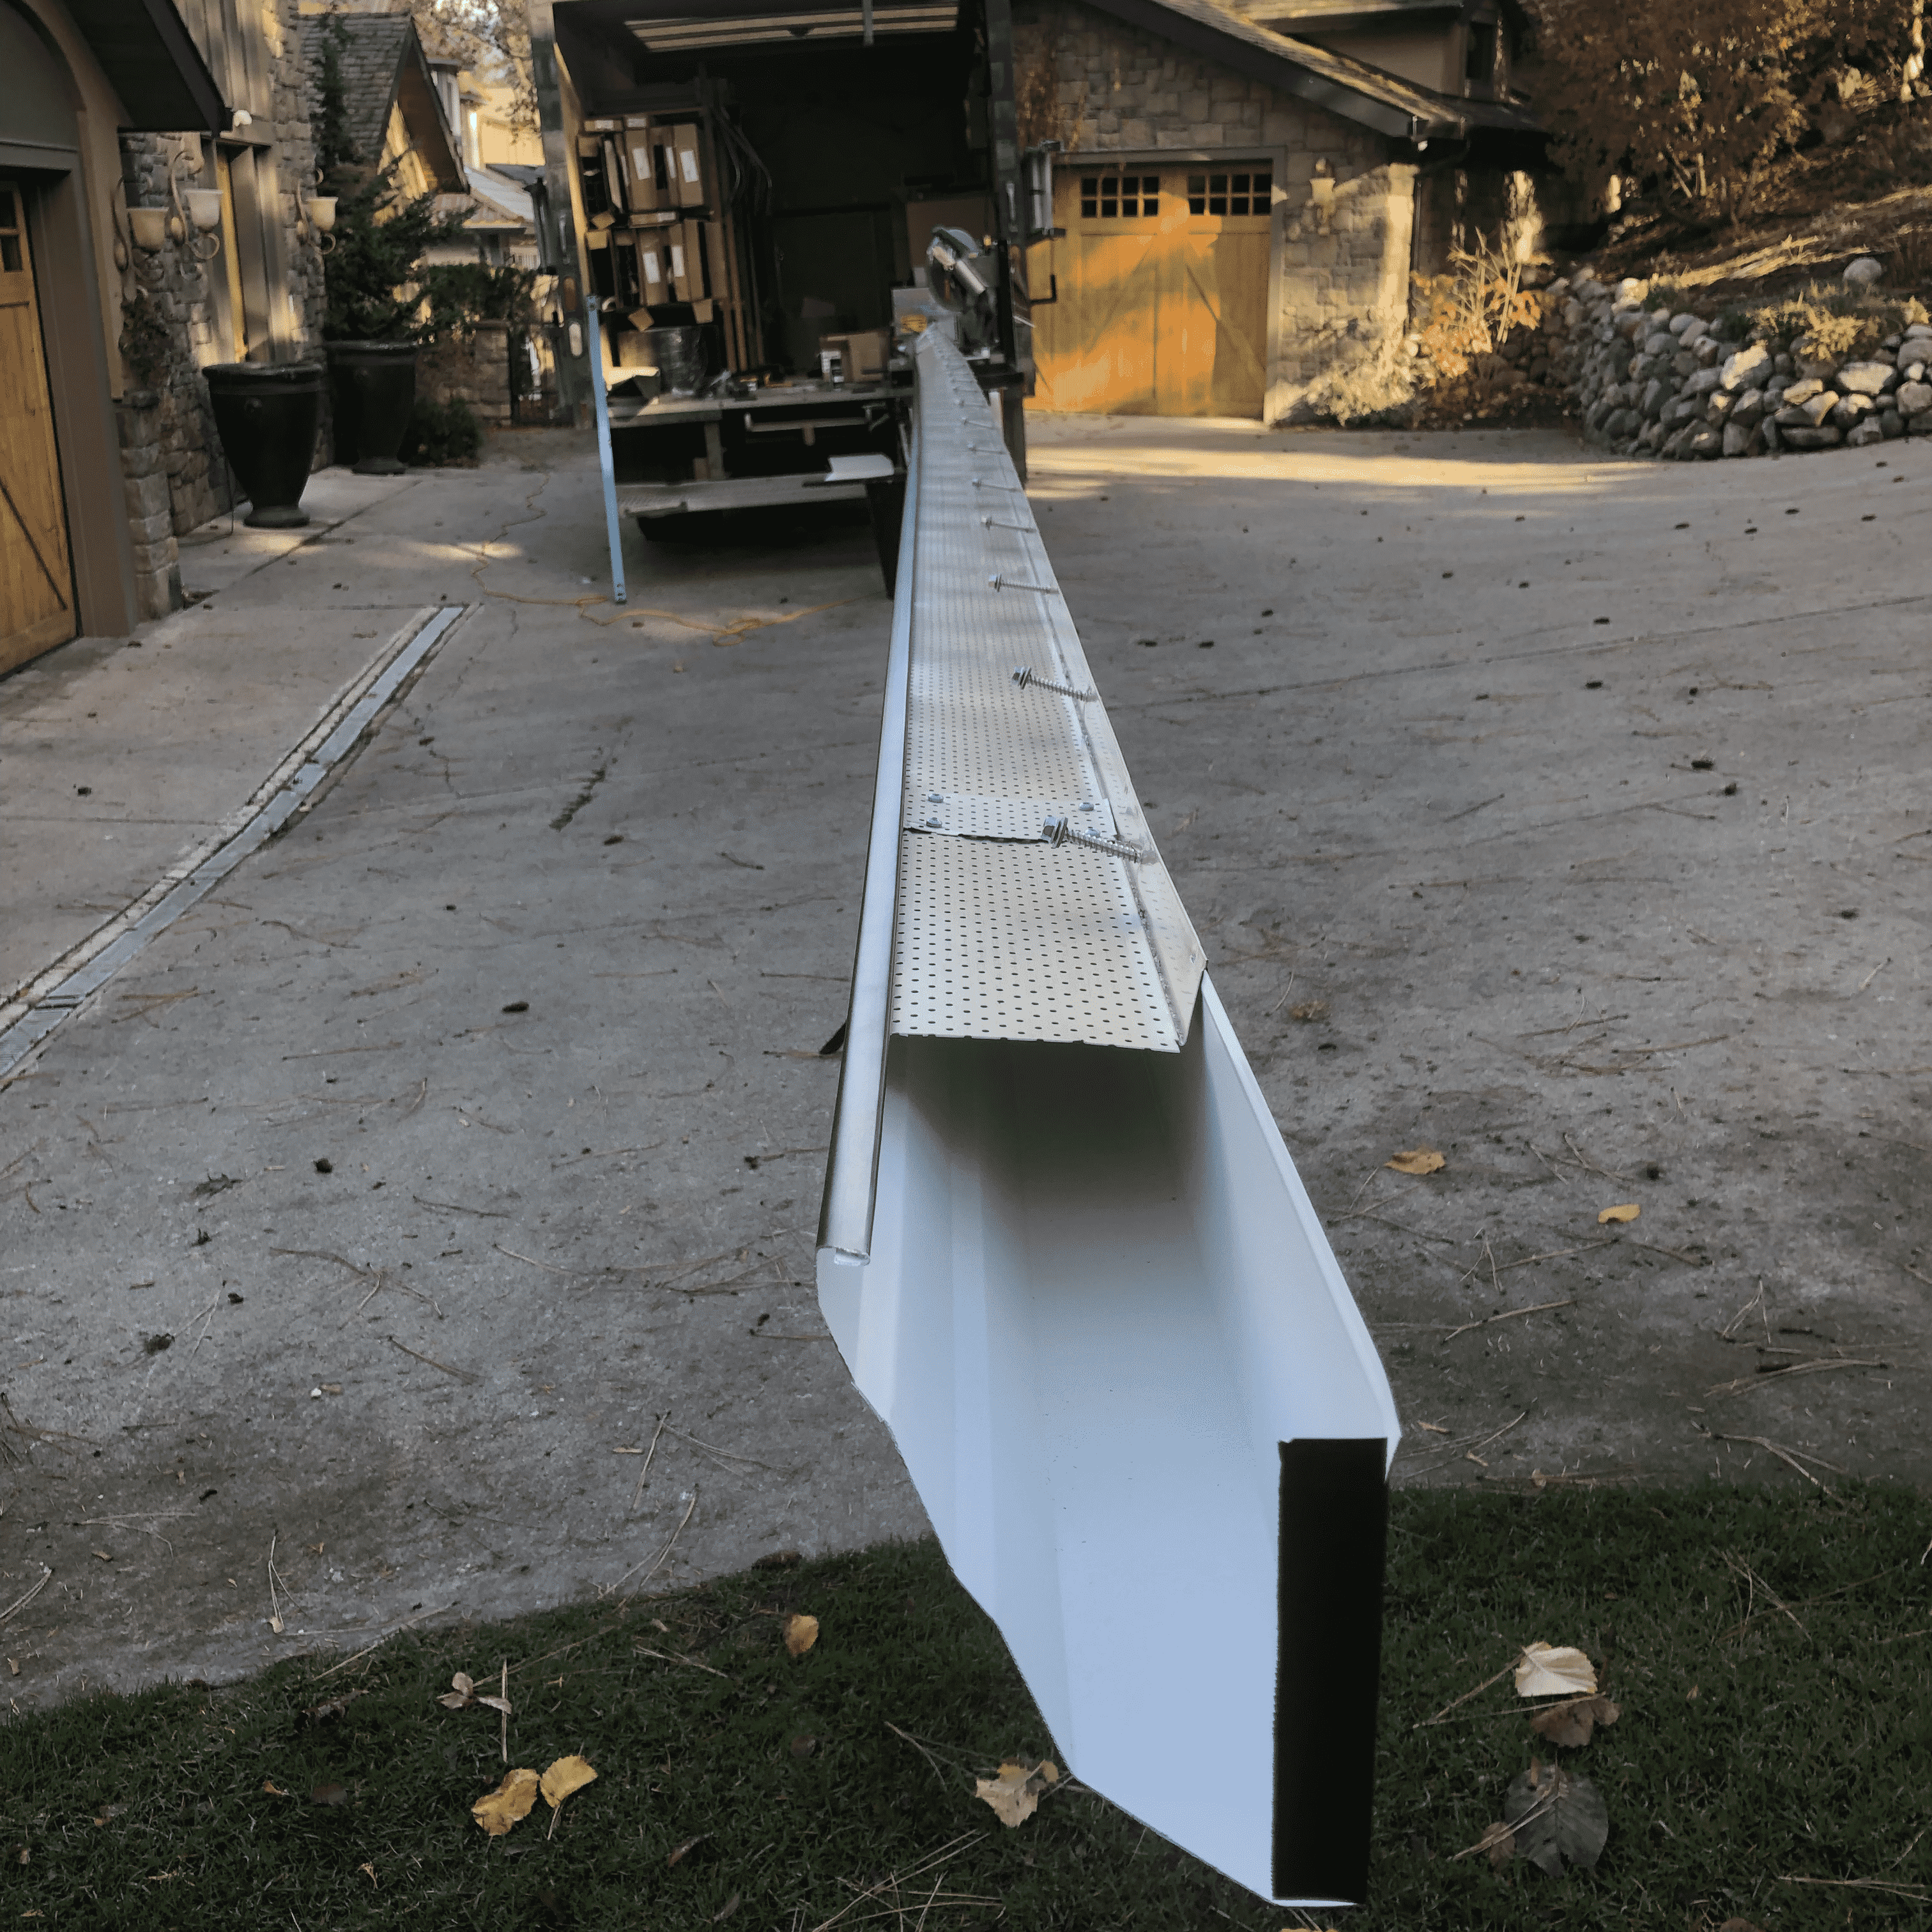 best leaf guard installation contractor near you to supply and install quality gutter leaf guard protection to keep your home safe from moisture.